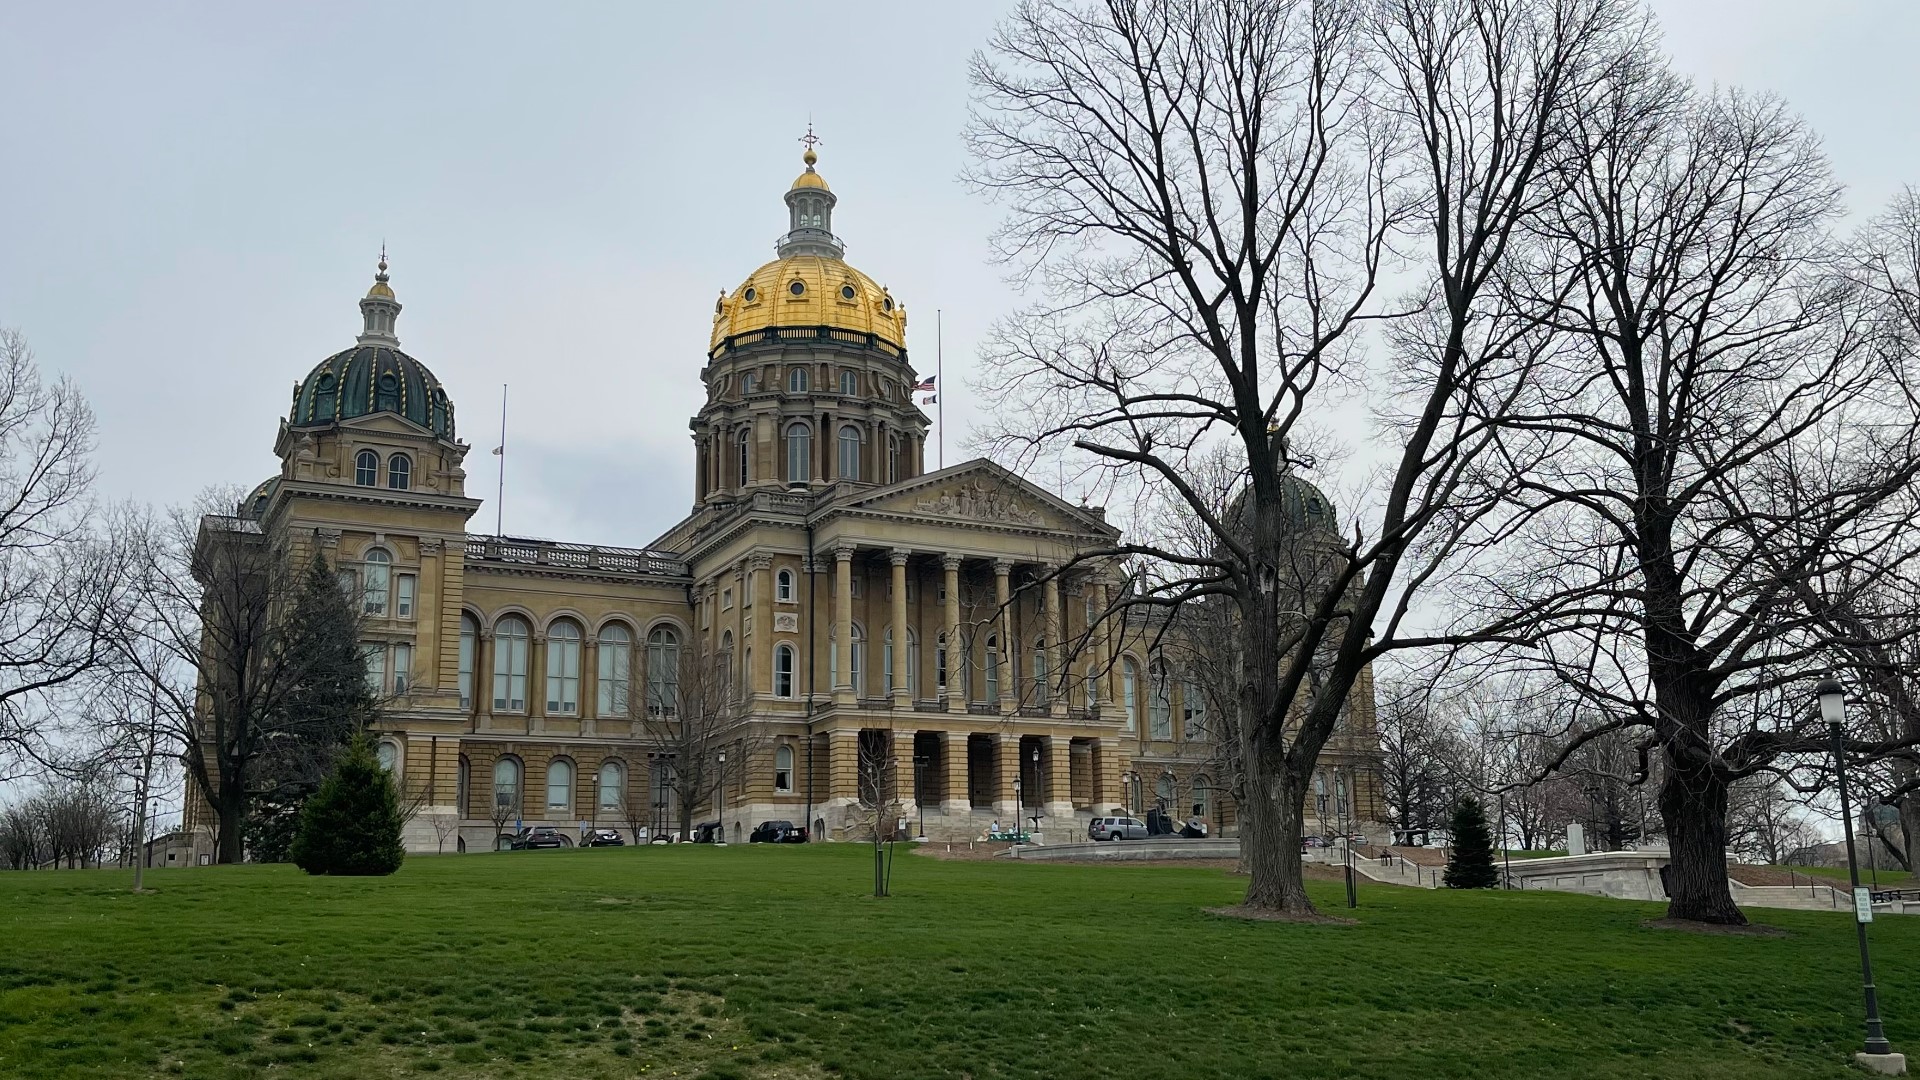 The proposed Constitutional amendment, which declares abortion is not protected in Iowa, still has a long way to go before the public could weigh in on the matter.